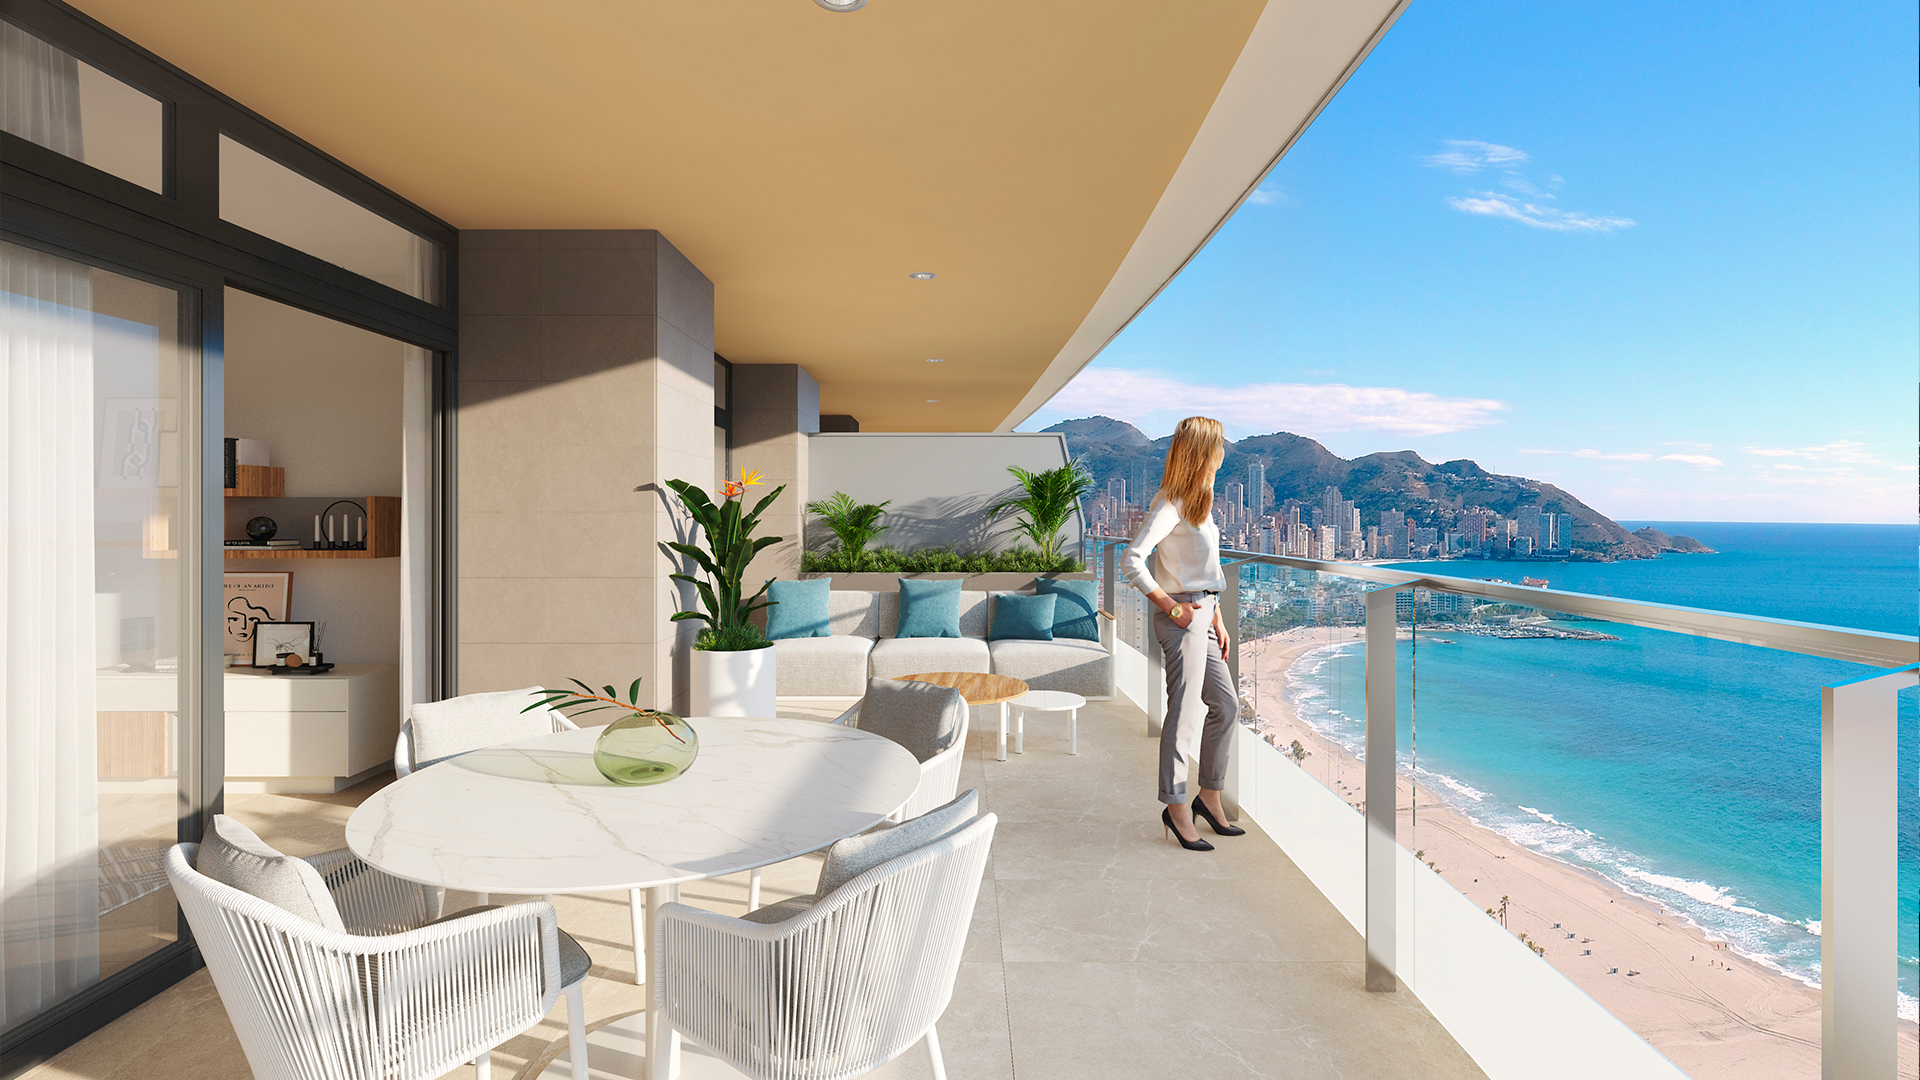 Luxurious apartments in Benidorm with sea views on all floors and only 50 meters from the beach